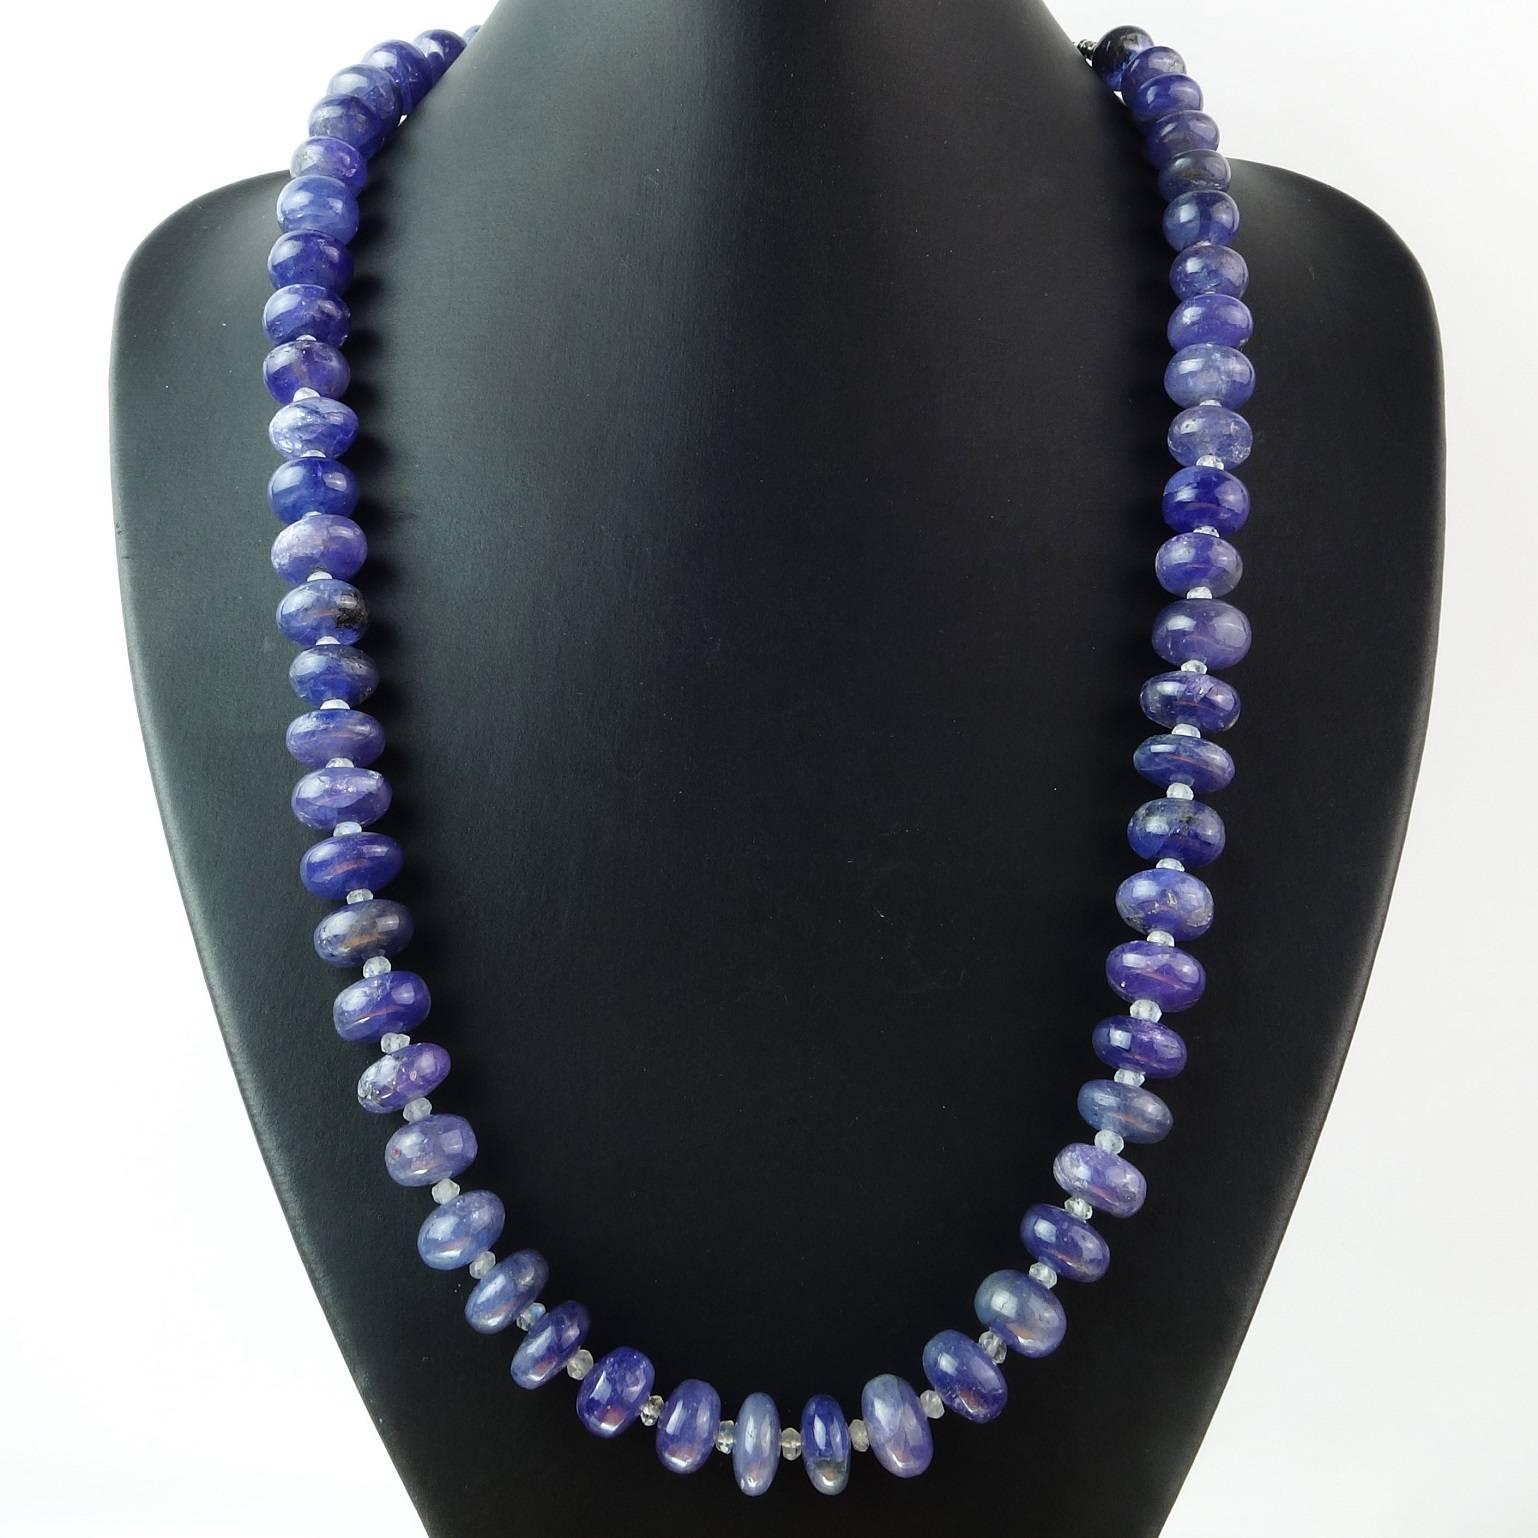 Gorgeous Translucent Tanzanite Rondel Necklace with Sterling Silver Clasp 3